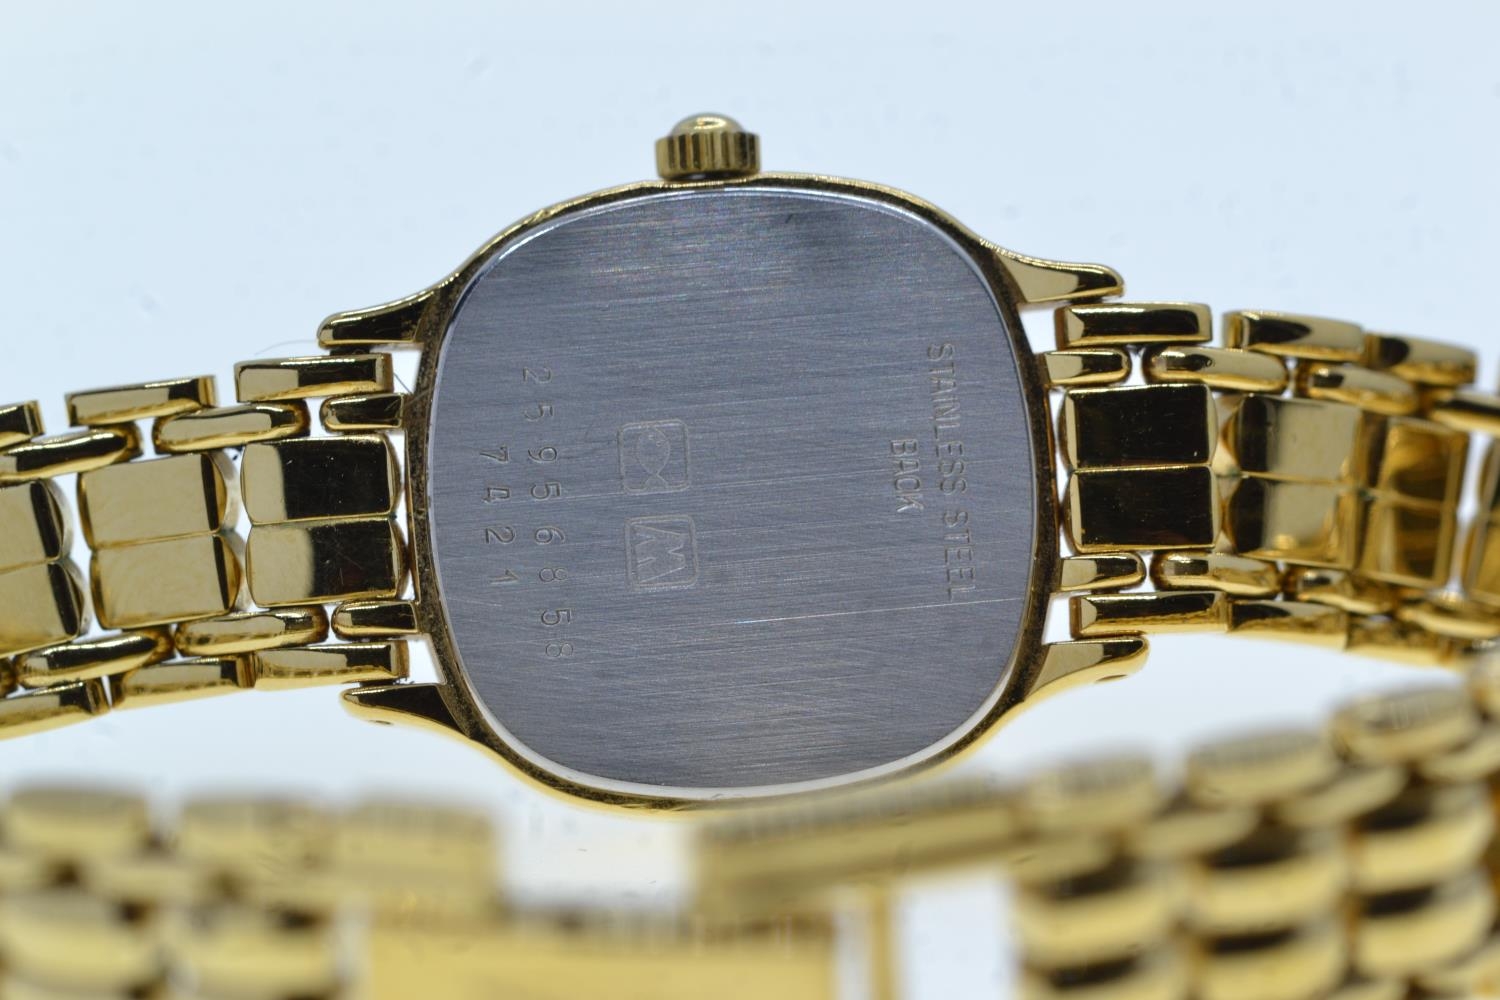 Longines ladies gold plated quartz wristwatch, case no. 25956858, ref. no. 12699-11, with papers & b - Image 2 of 9